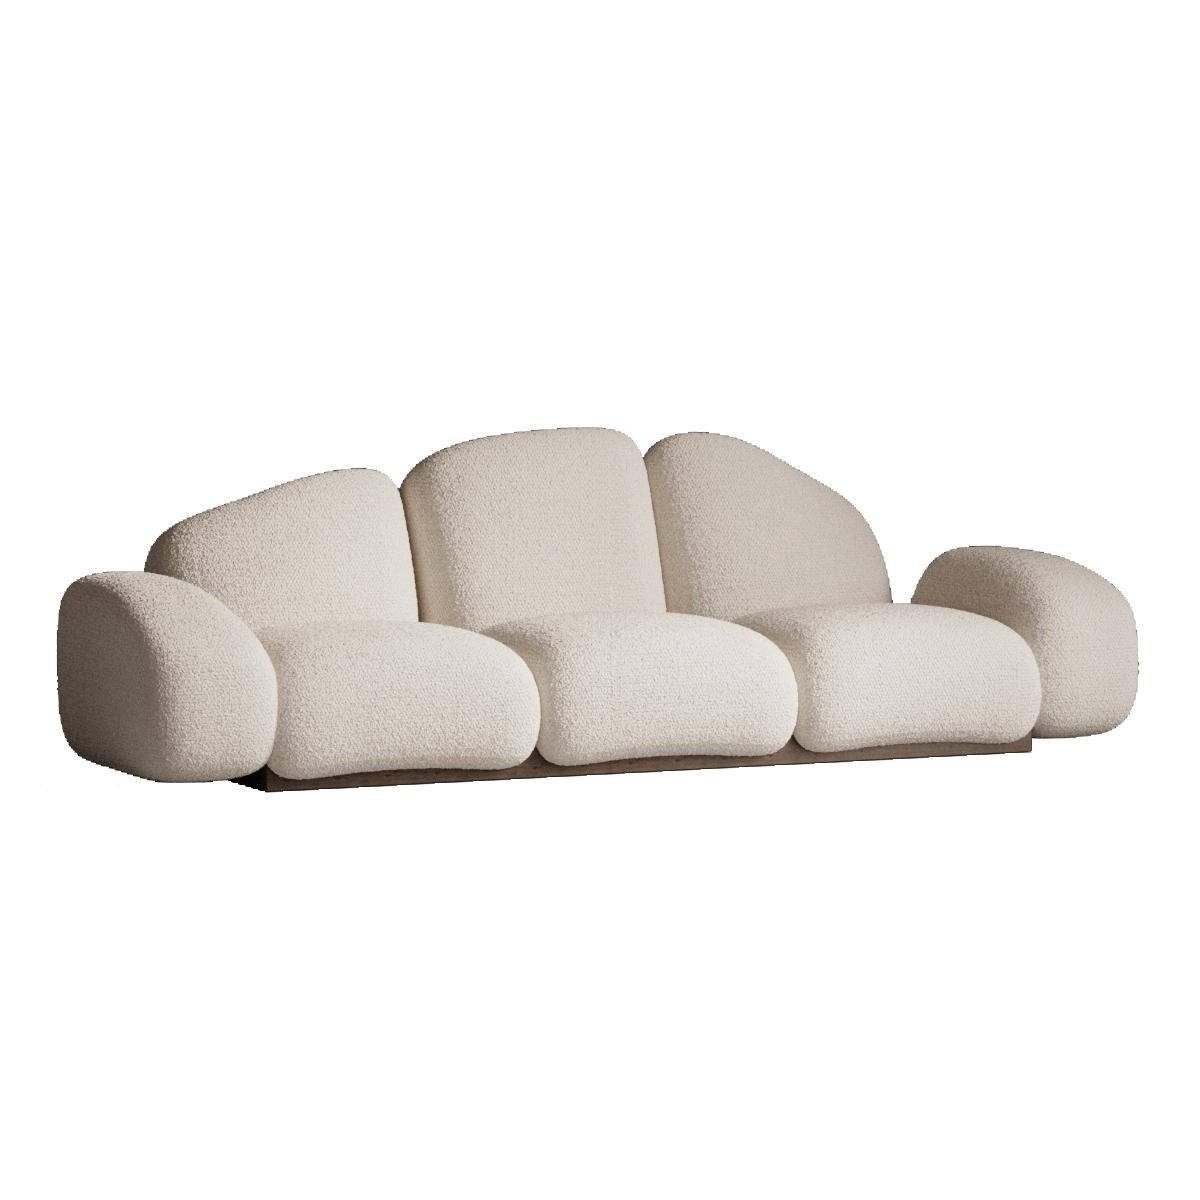 Legend Sofa by Plyus Design
Dimensions: D 120 x W 320 x H 95 cm
Materials:  Wood, HR foam, polyester wadding, fabric upholstery.



PLYUS Furniture creates pieces in collectible design segment. We create modern, ergonomic furniture in a minimalist